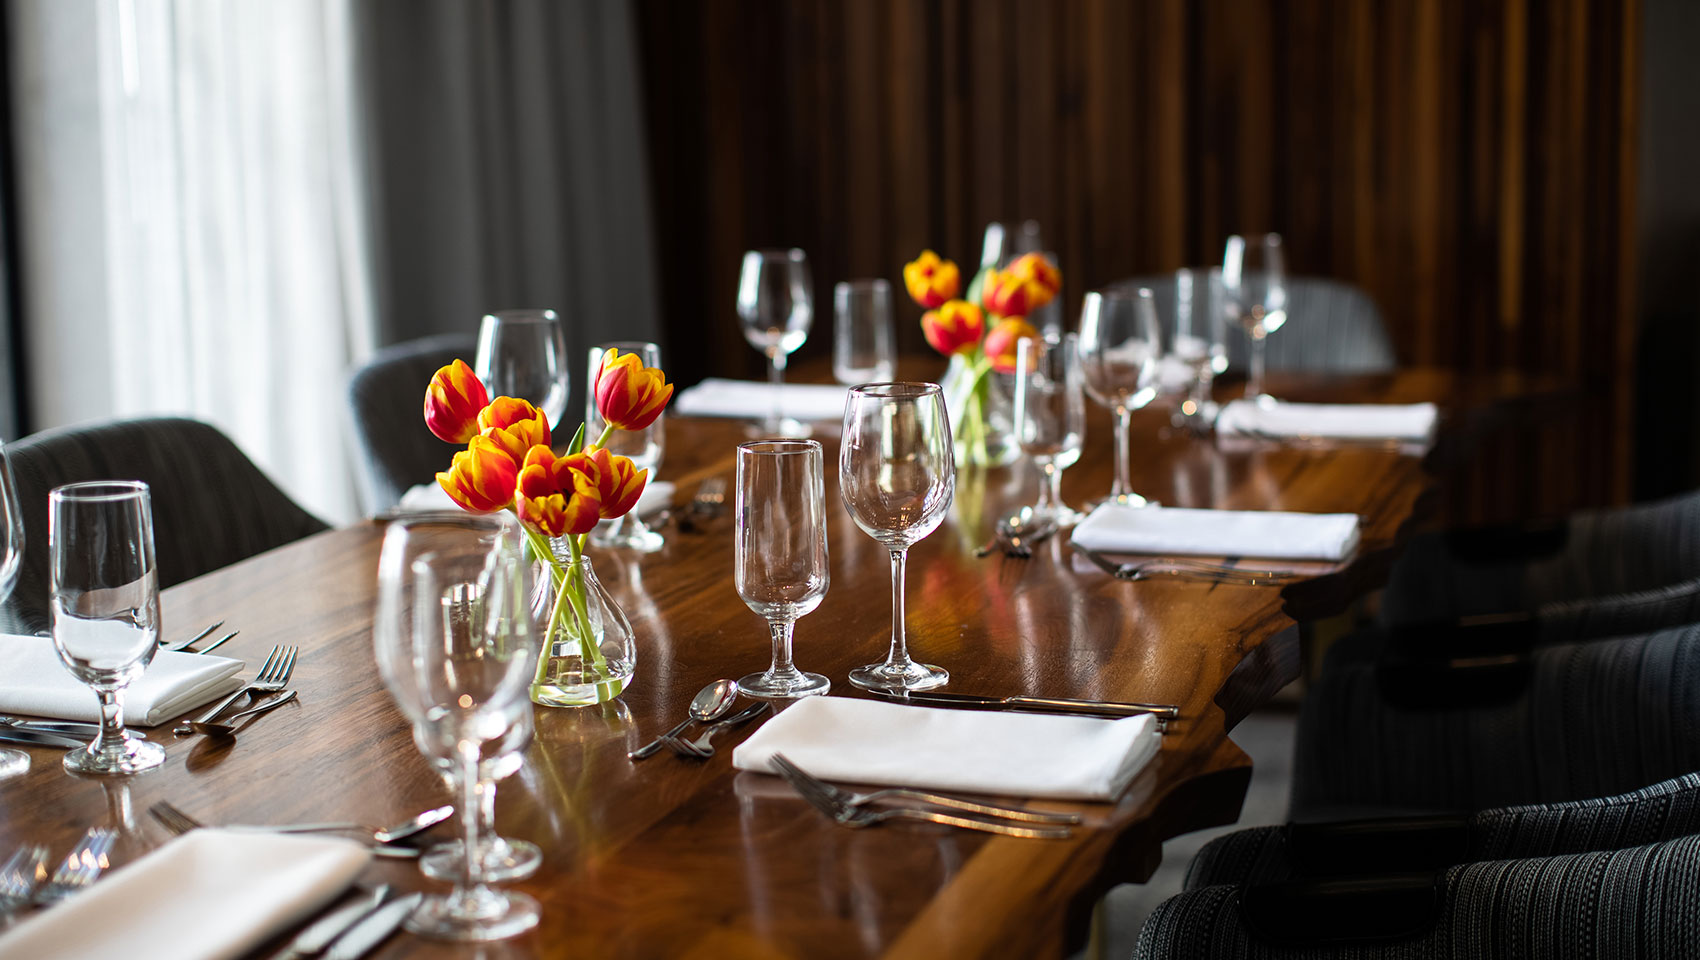 Private dining room set up in Calder room located in Kimpton Hotel Palomar Philadelphia glassware and floral arrangements in the center of a long wood table with chairs surrounding  